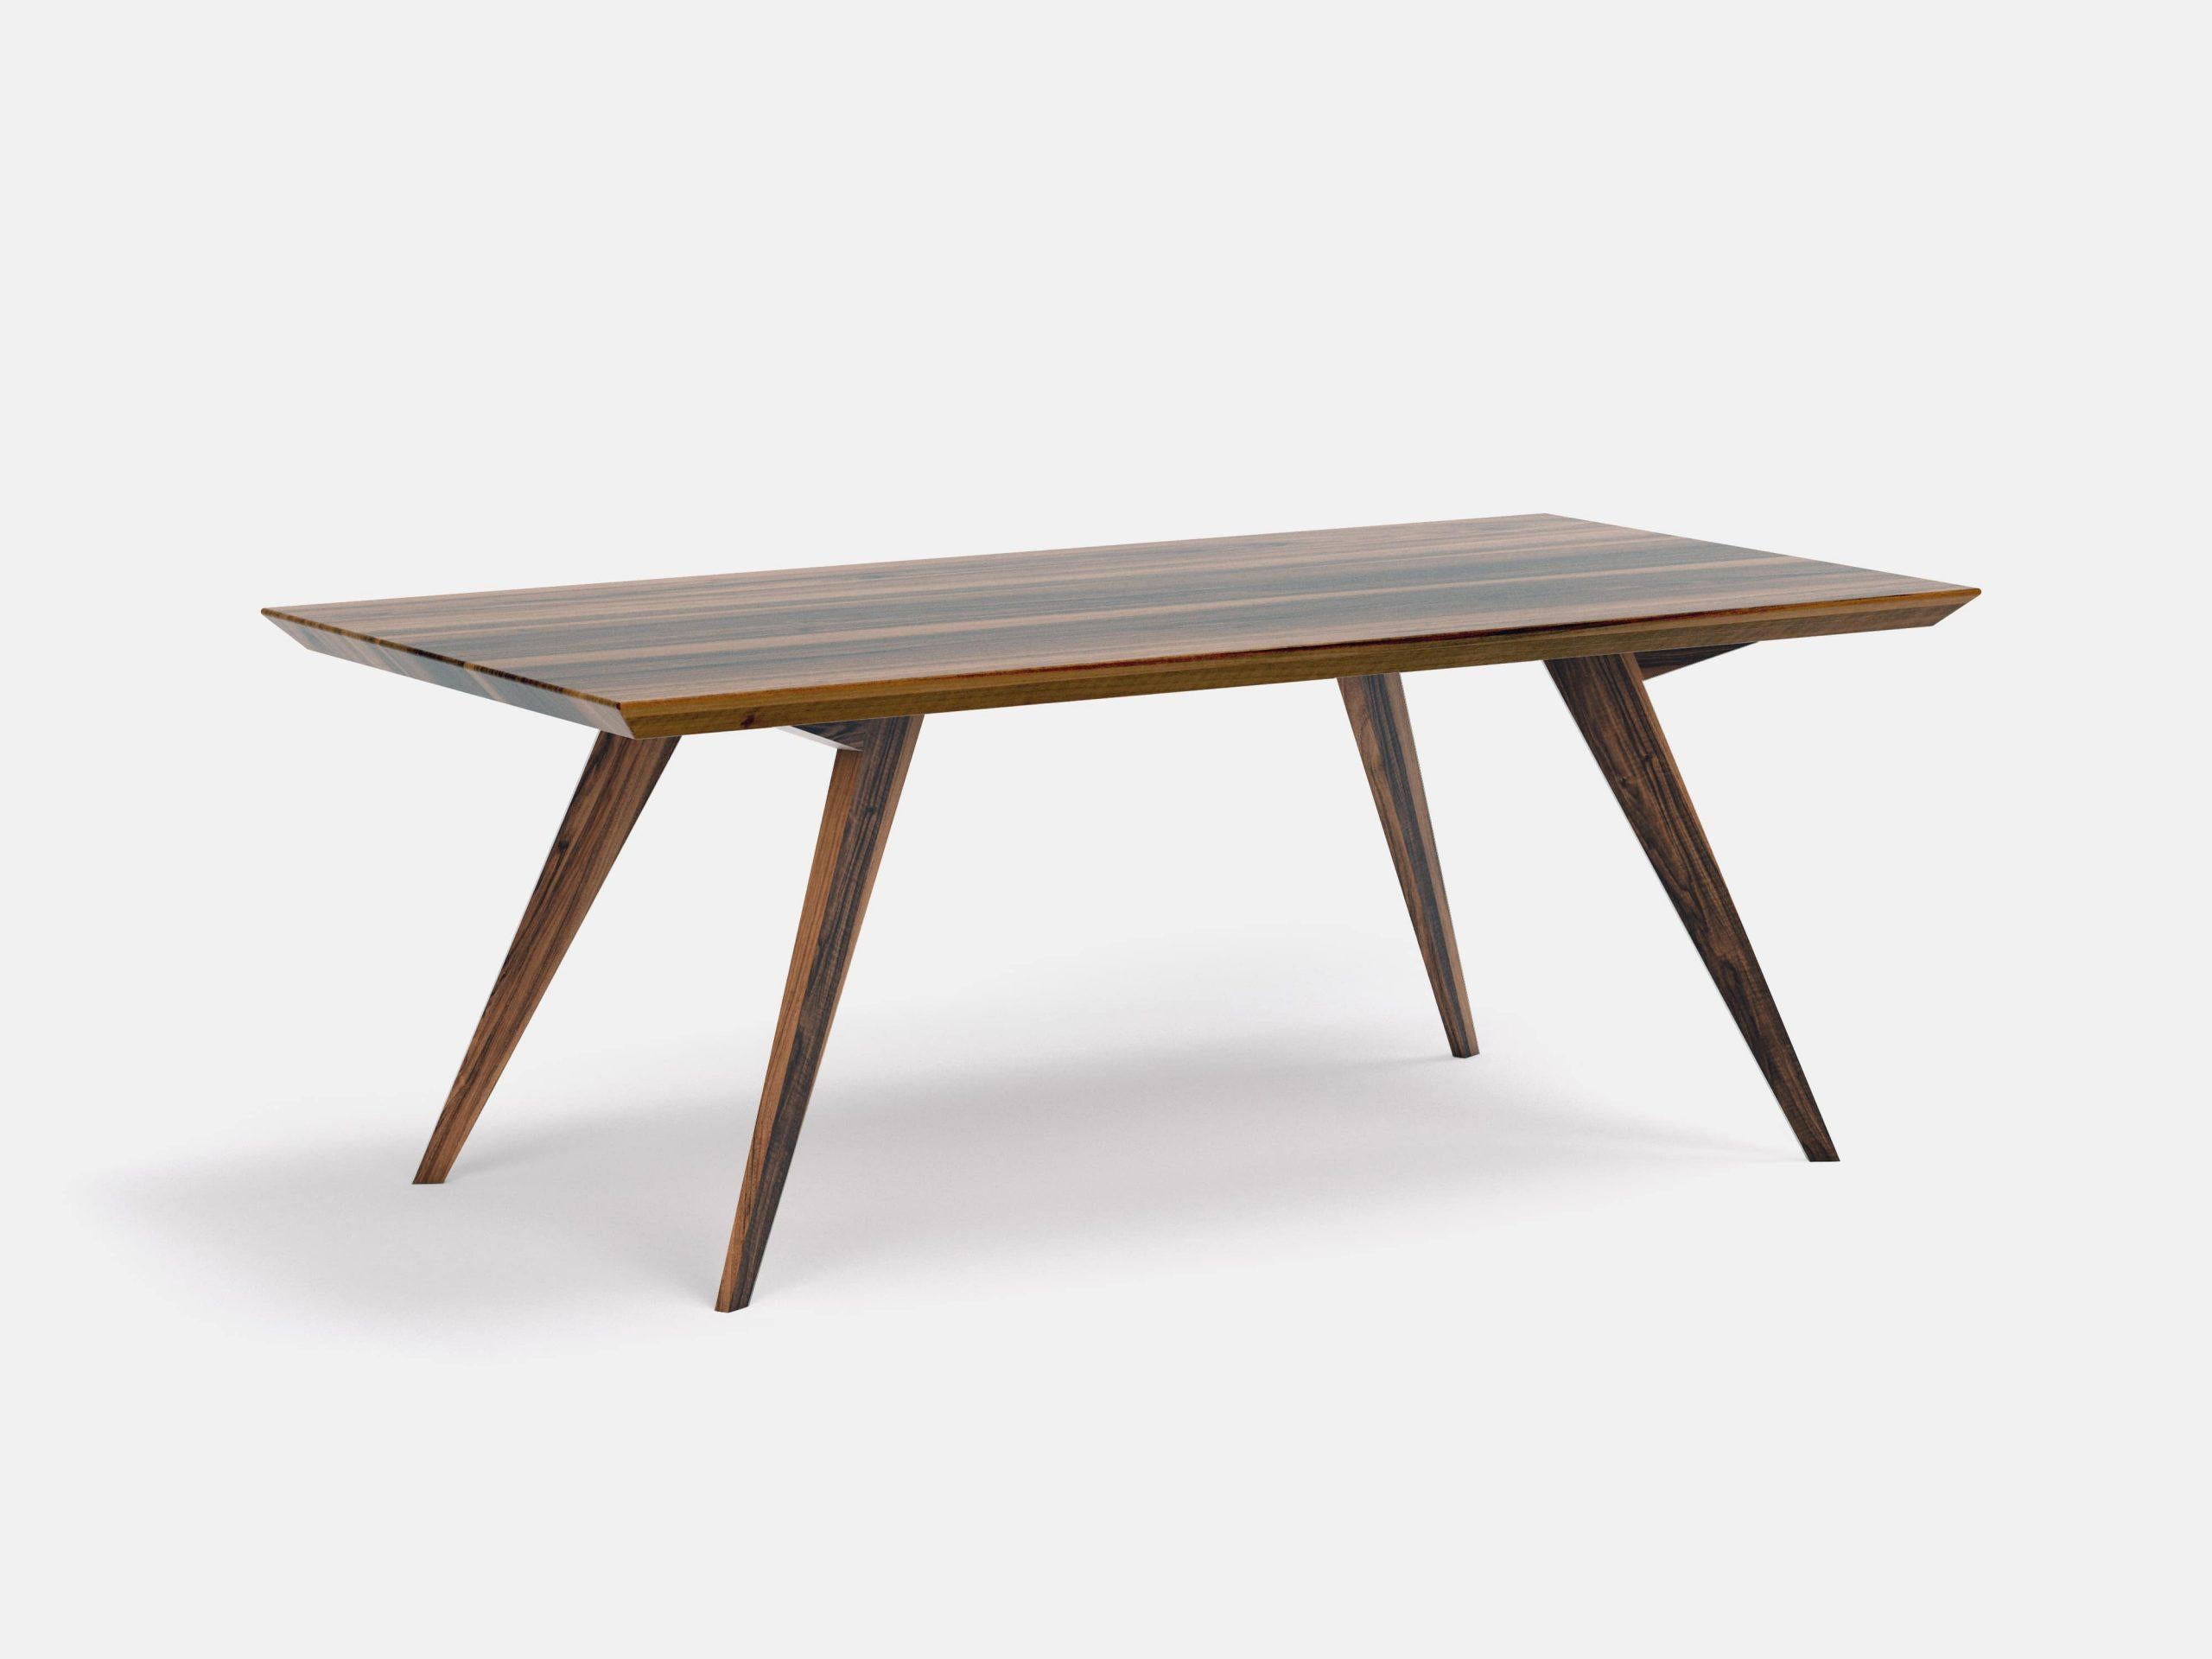 Walnut Minimalist 400 dining table 
Dimensions: W 250 x D 100 x H 75 cm
Materials: American walnut 100% solid wood

Dimensions available: 160, 200, 250, 300, 350, 400 cm
  

Roly-Poly table is the proof that through design we can create